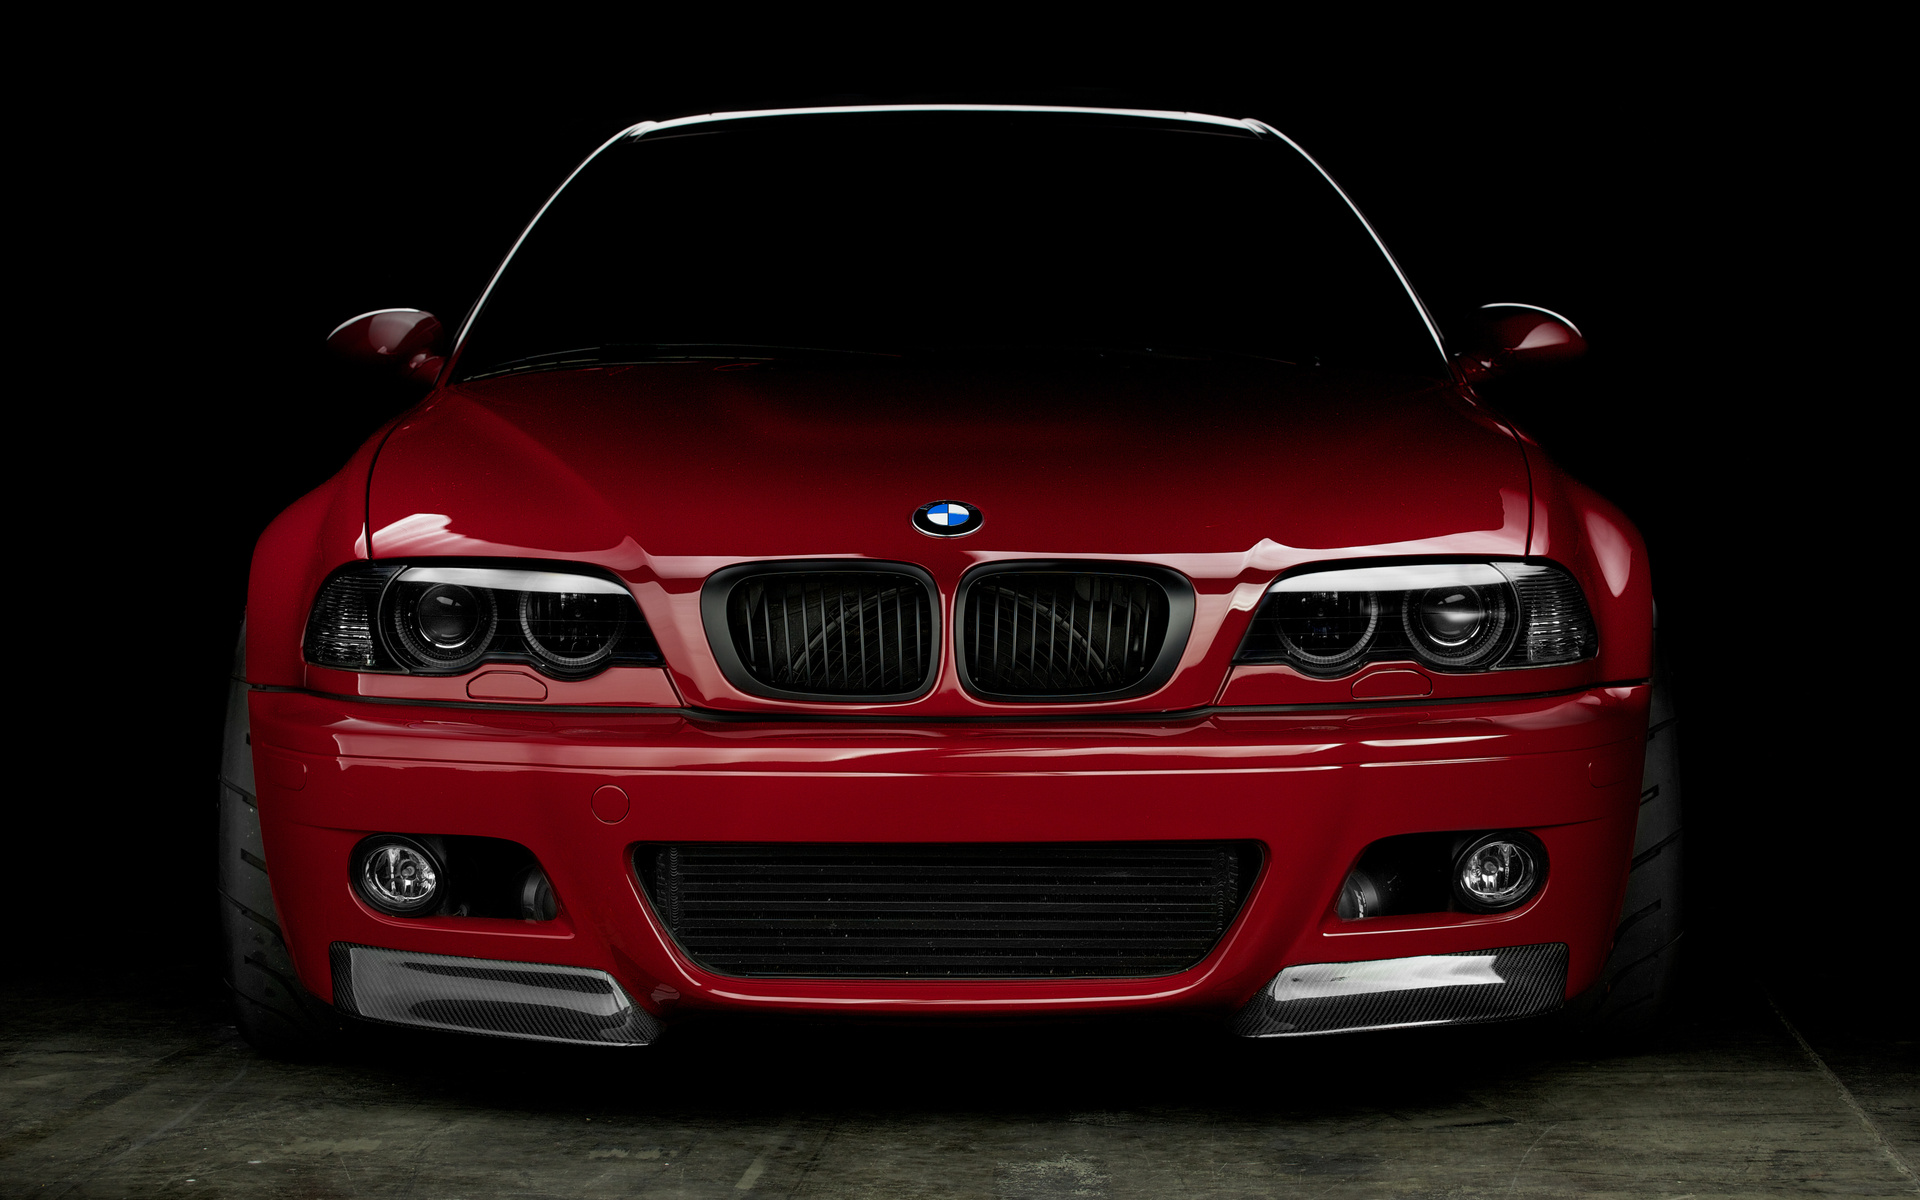 Wallpapers bmw red front end on the desktop